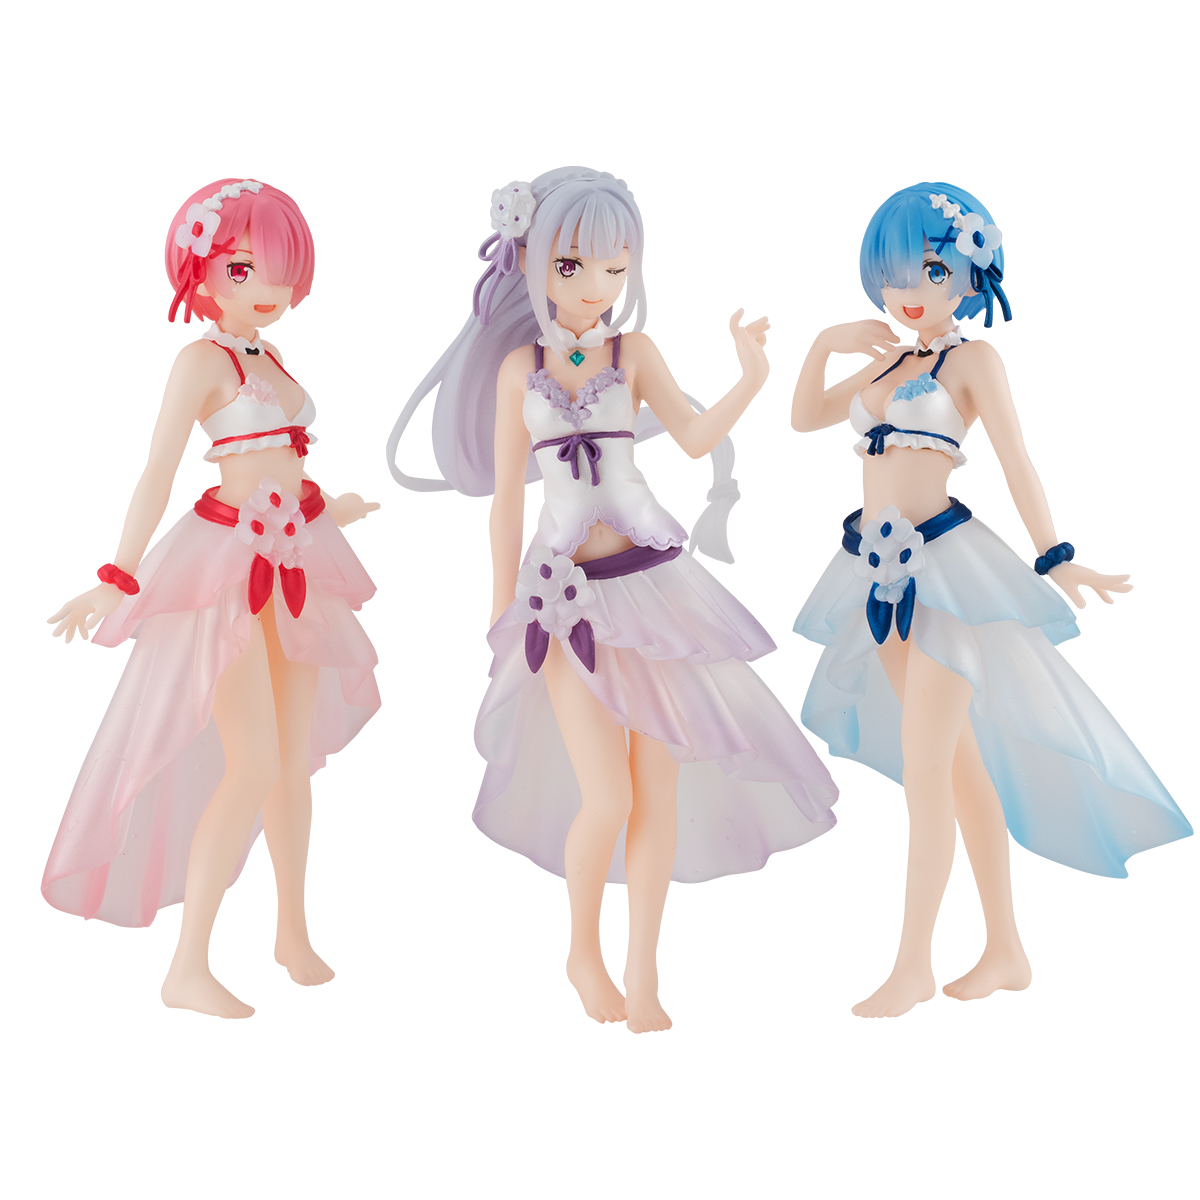 Gashaportraits Re Zero Special Set Re Zero Starting Life In Another World Premium Bandai Singapore Online Store For Action Figures Model Kits Toys And More